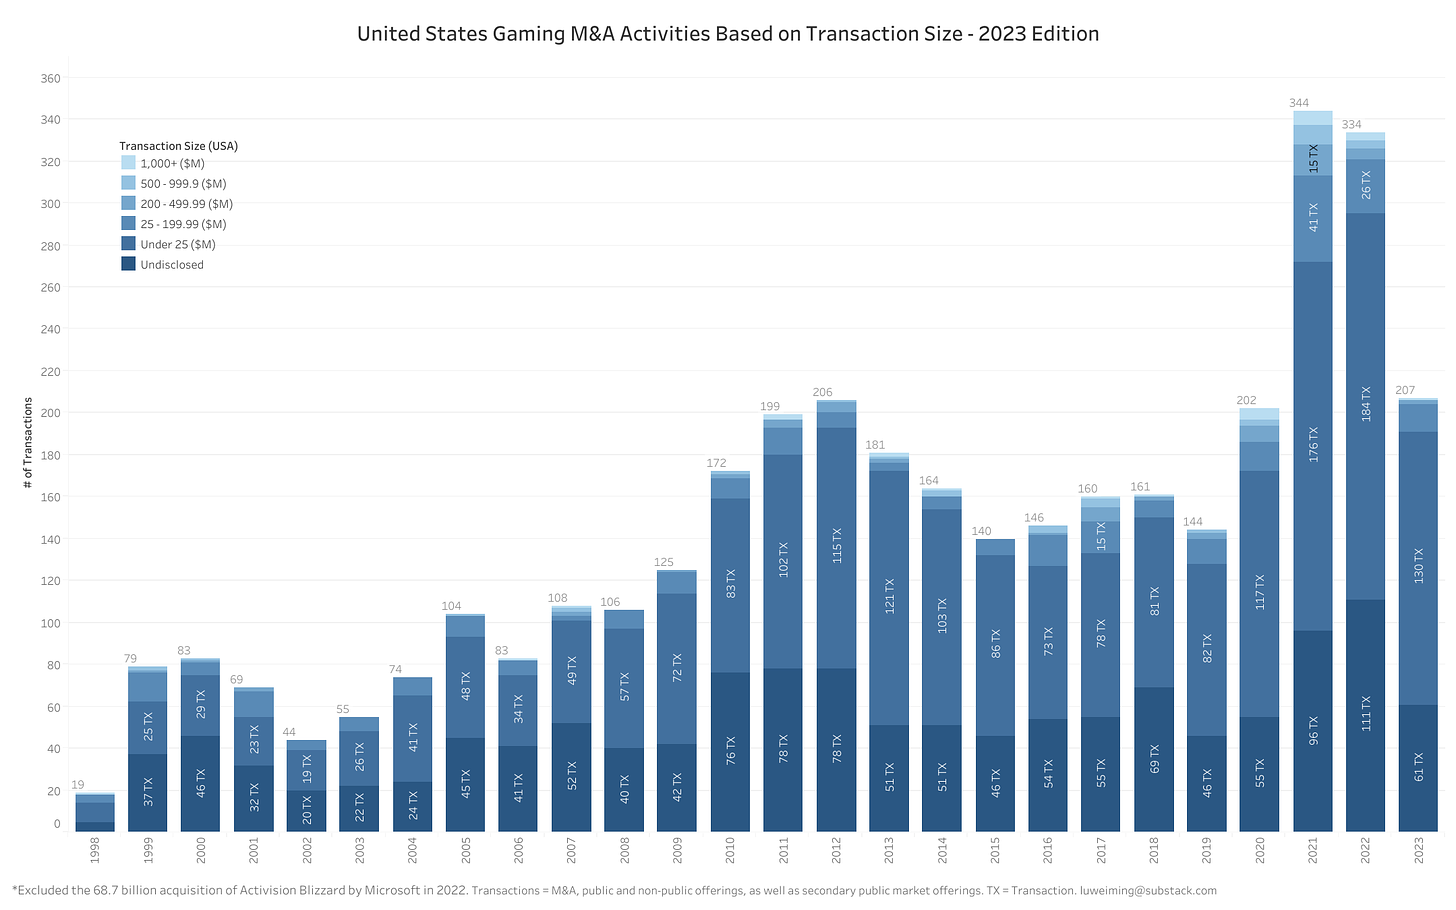 United States Gaming M&A Activities Based on Transaction Size - 2023 Edition